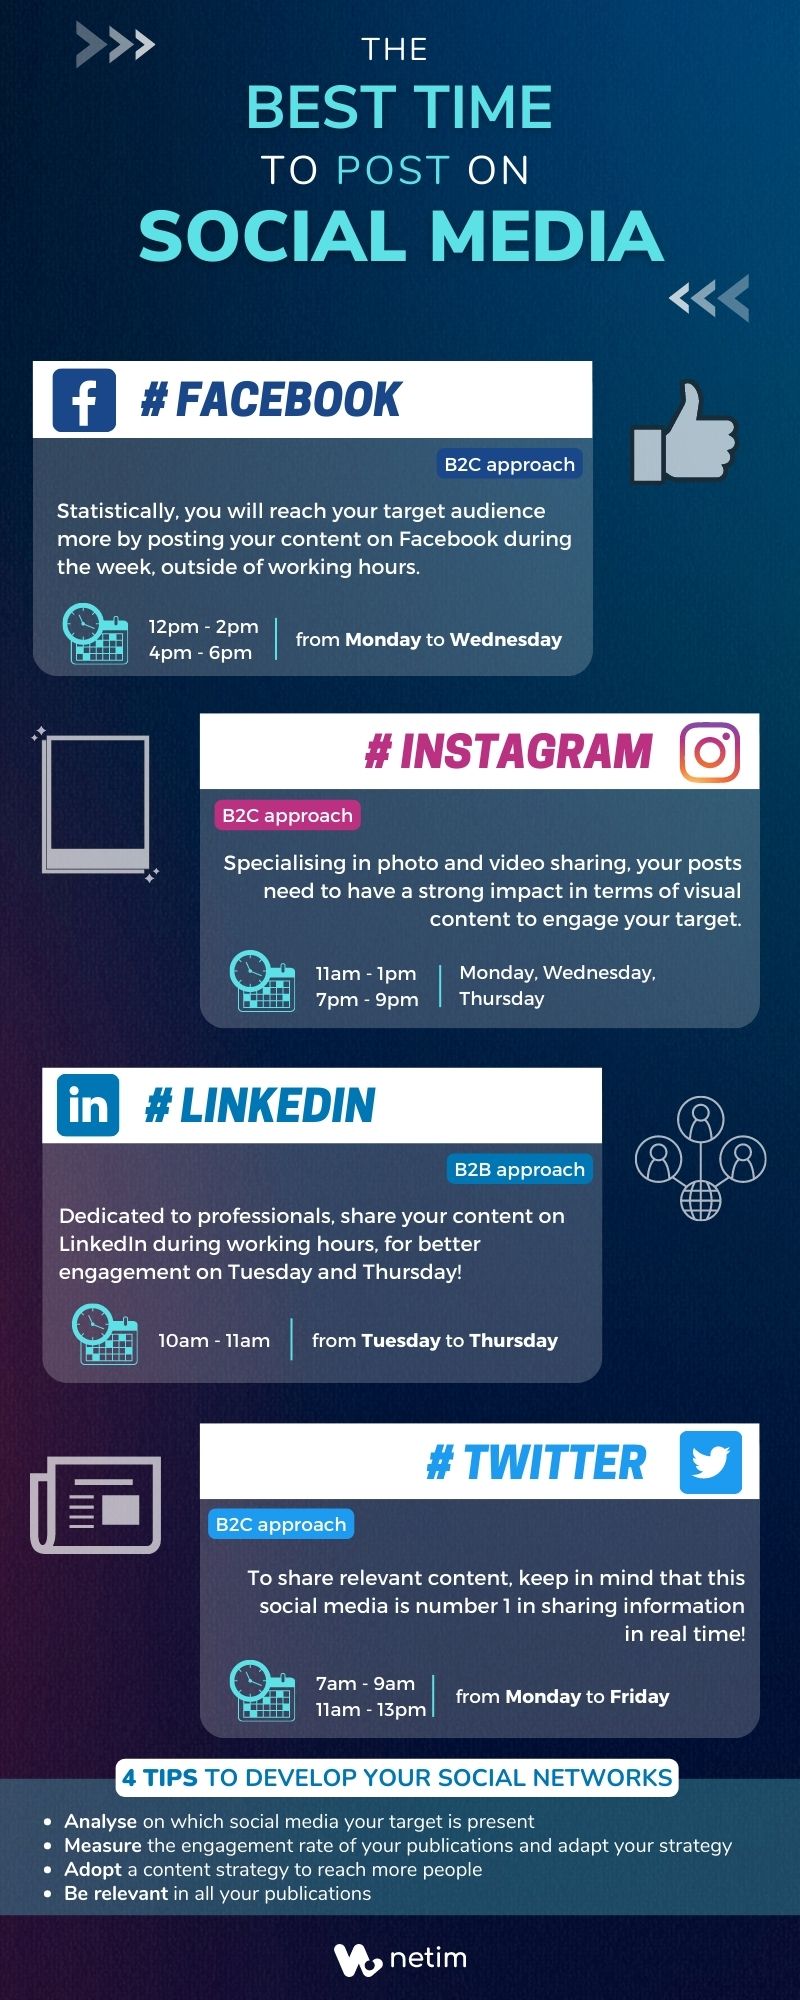 Infographic: The best time to post on social media